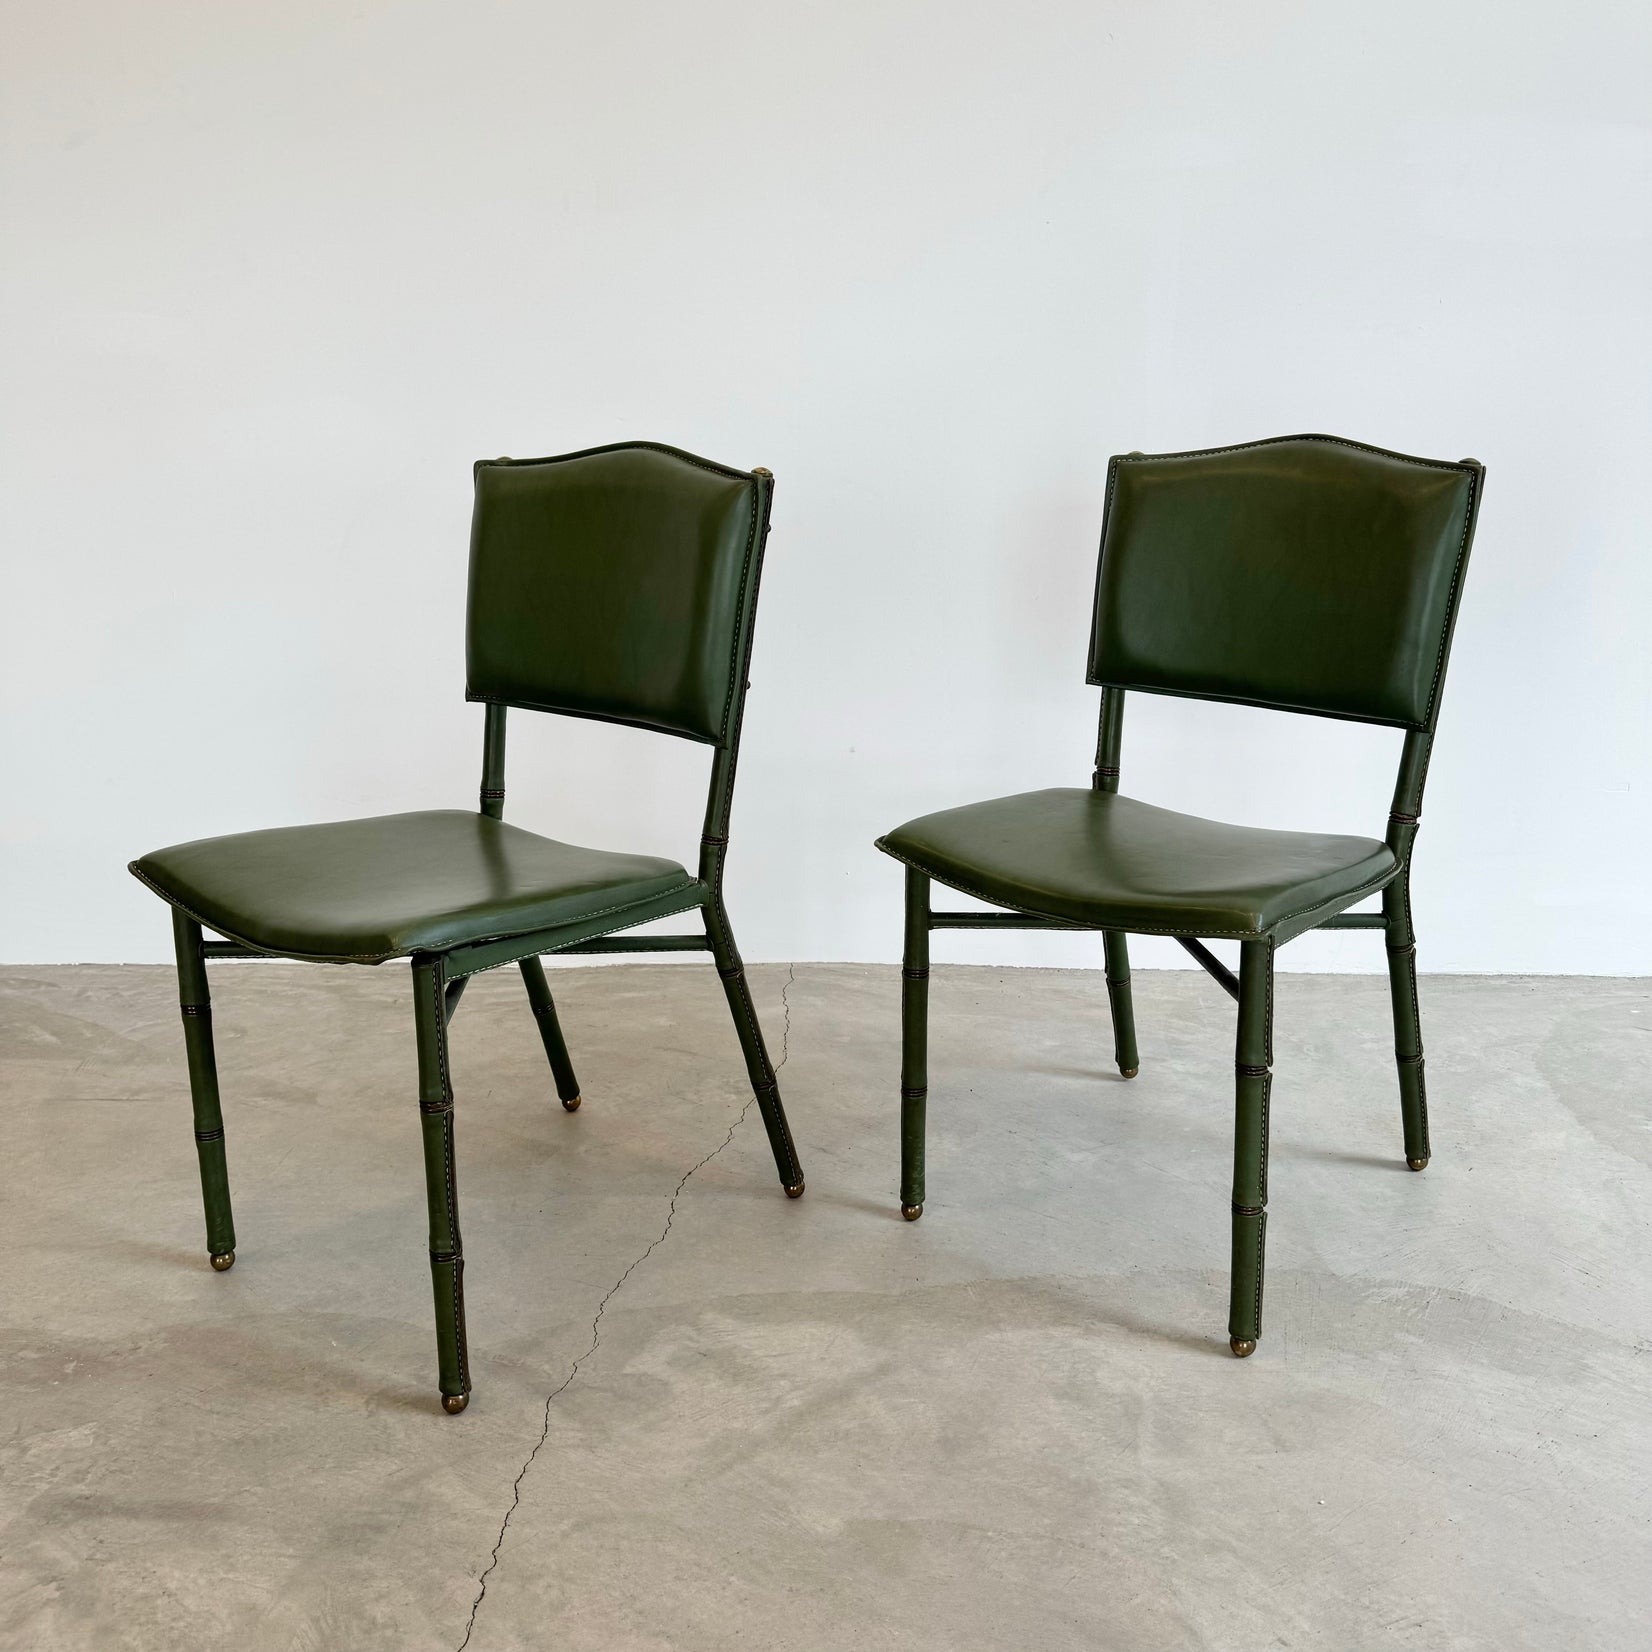 Jacques Adnet Green Leather Chairs, Circa 1950s, France